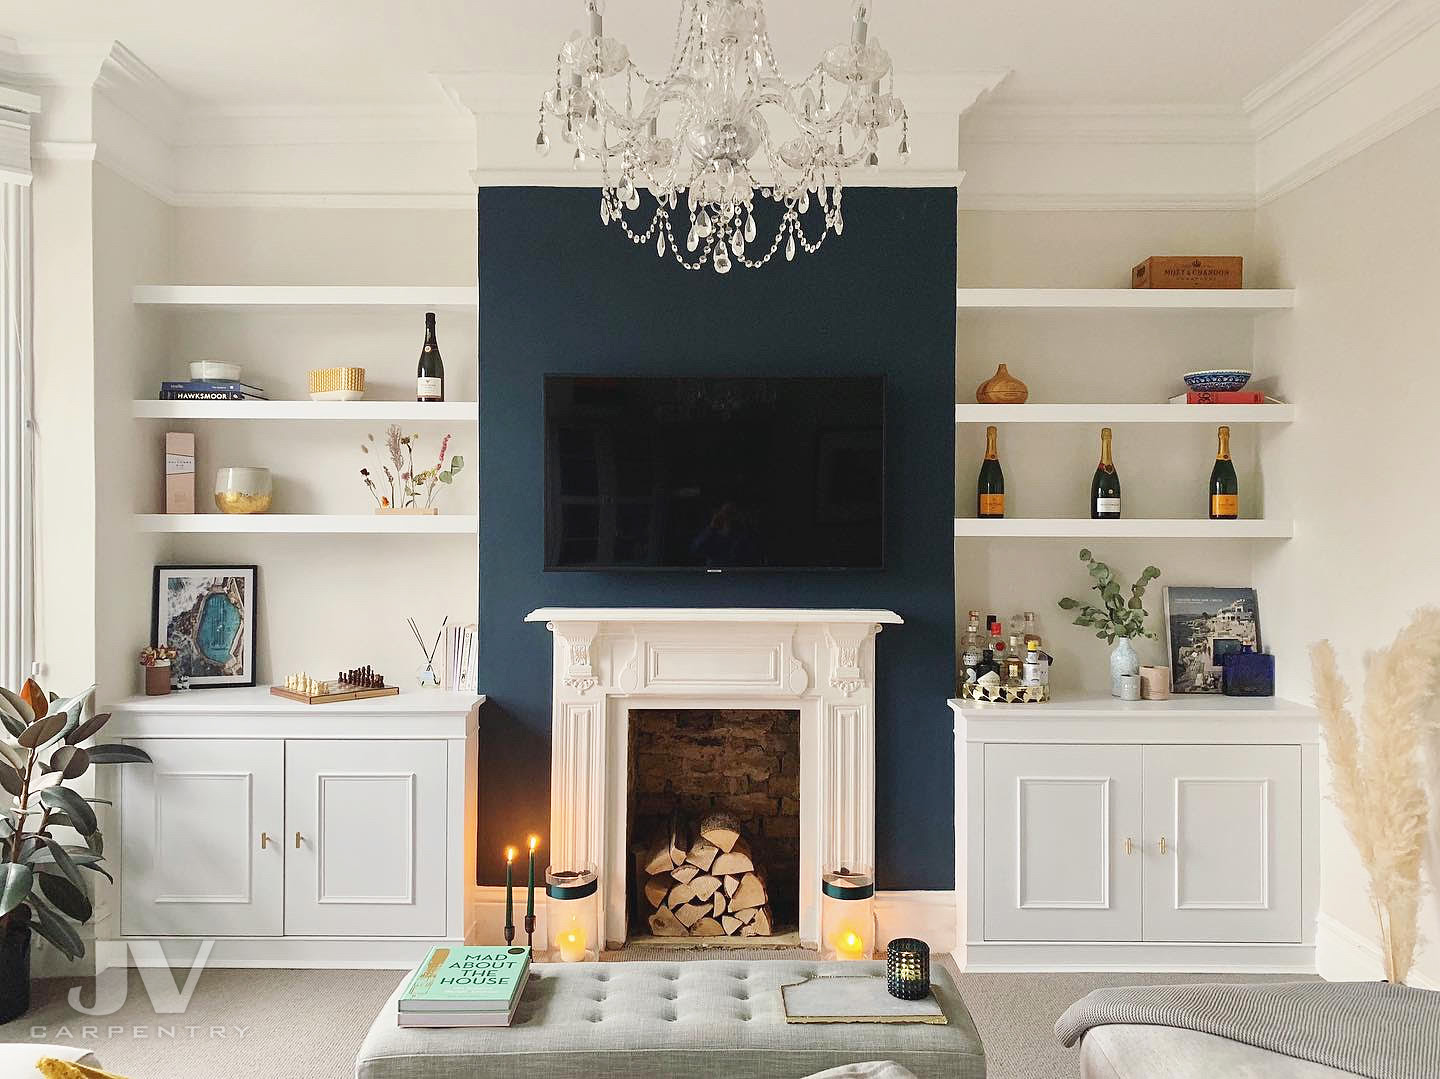 23 Alcove Shelving Ideas For Your, Bookshelf On Either Side Of Fireplace